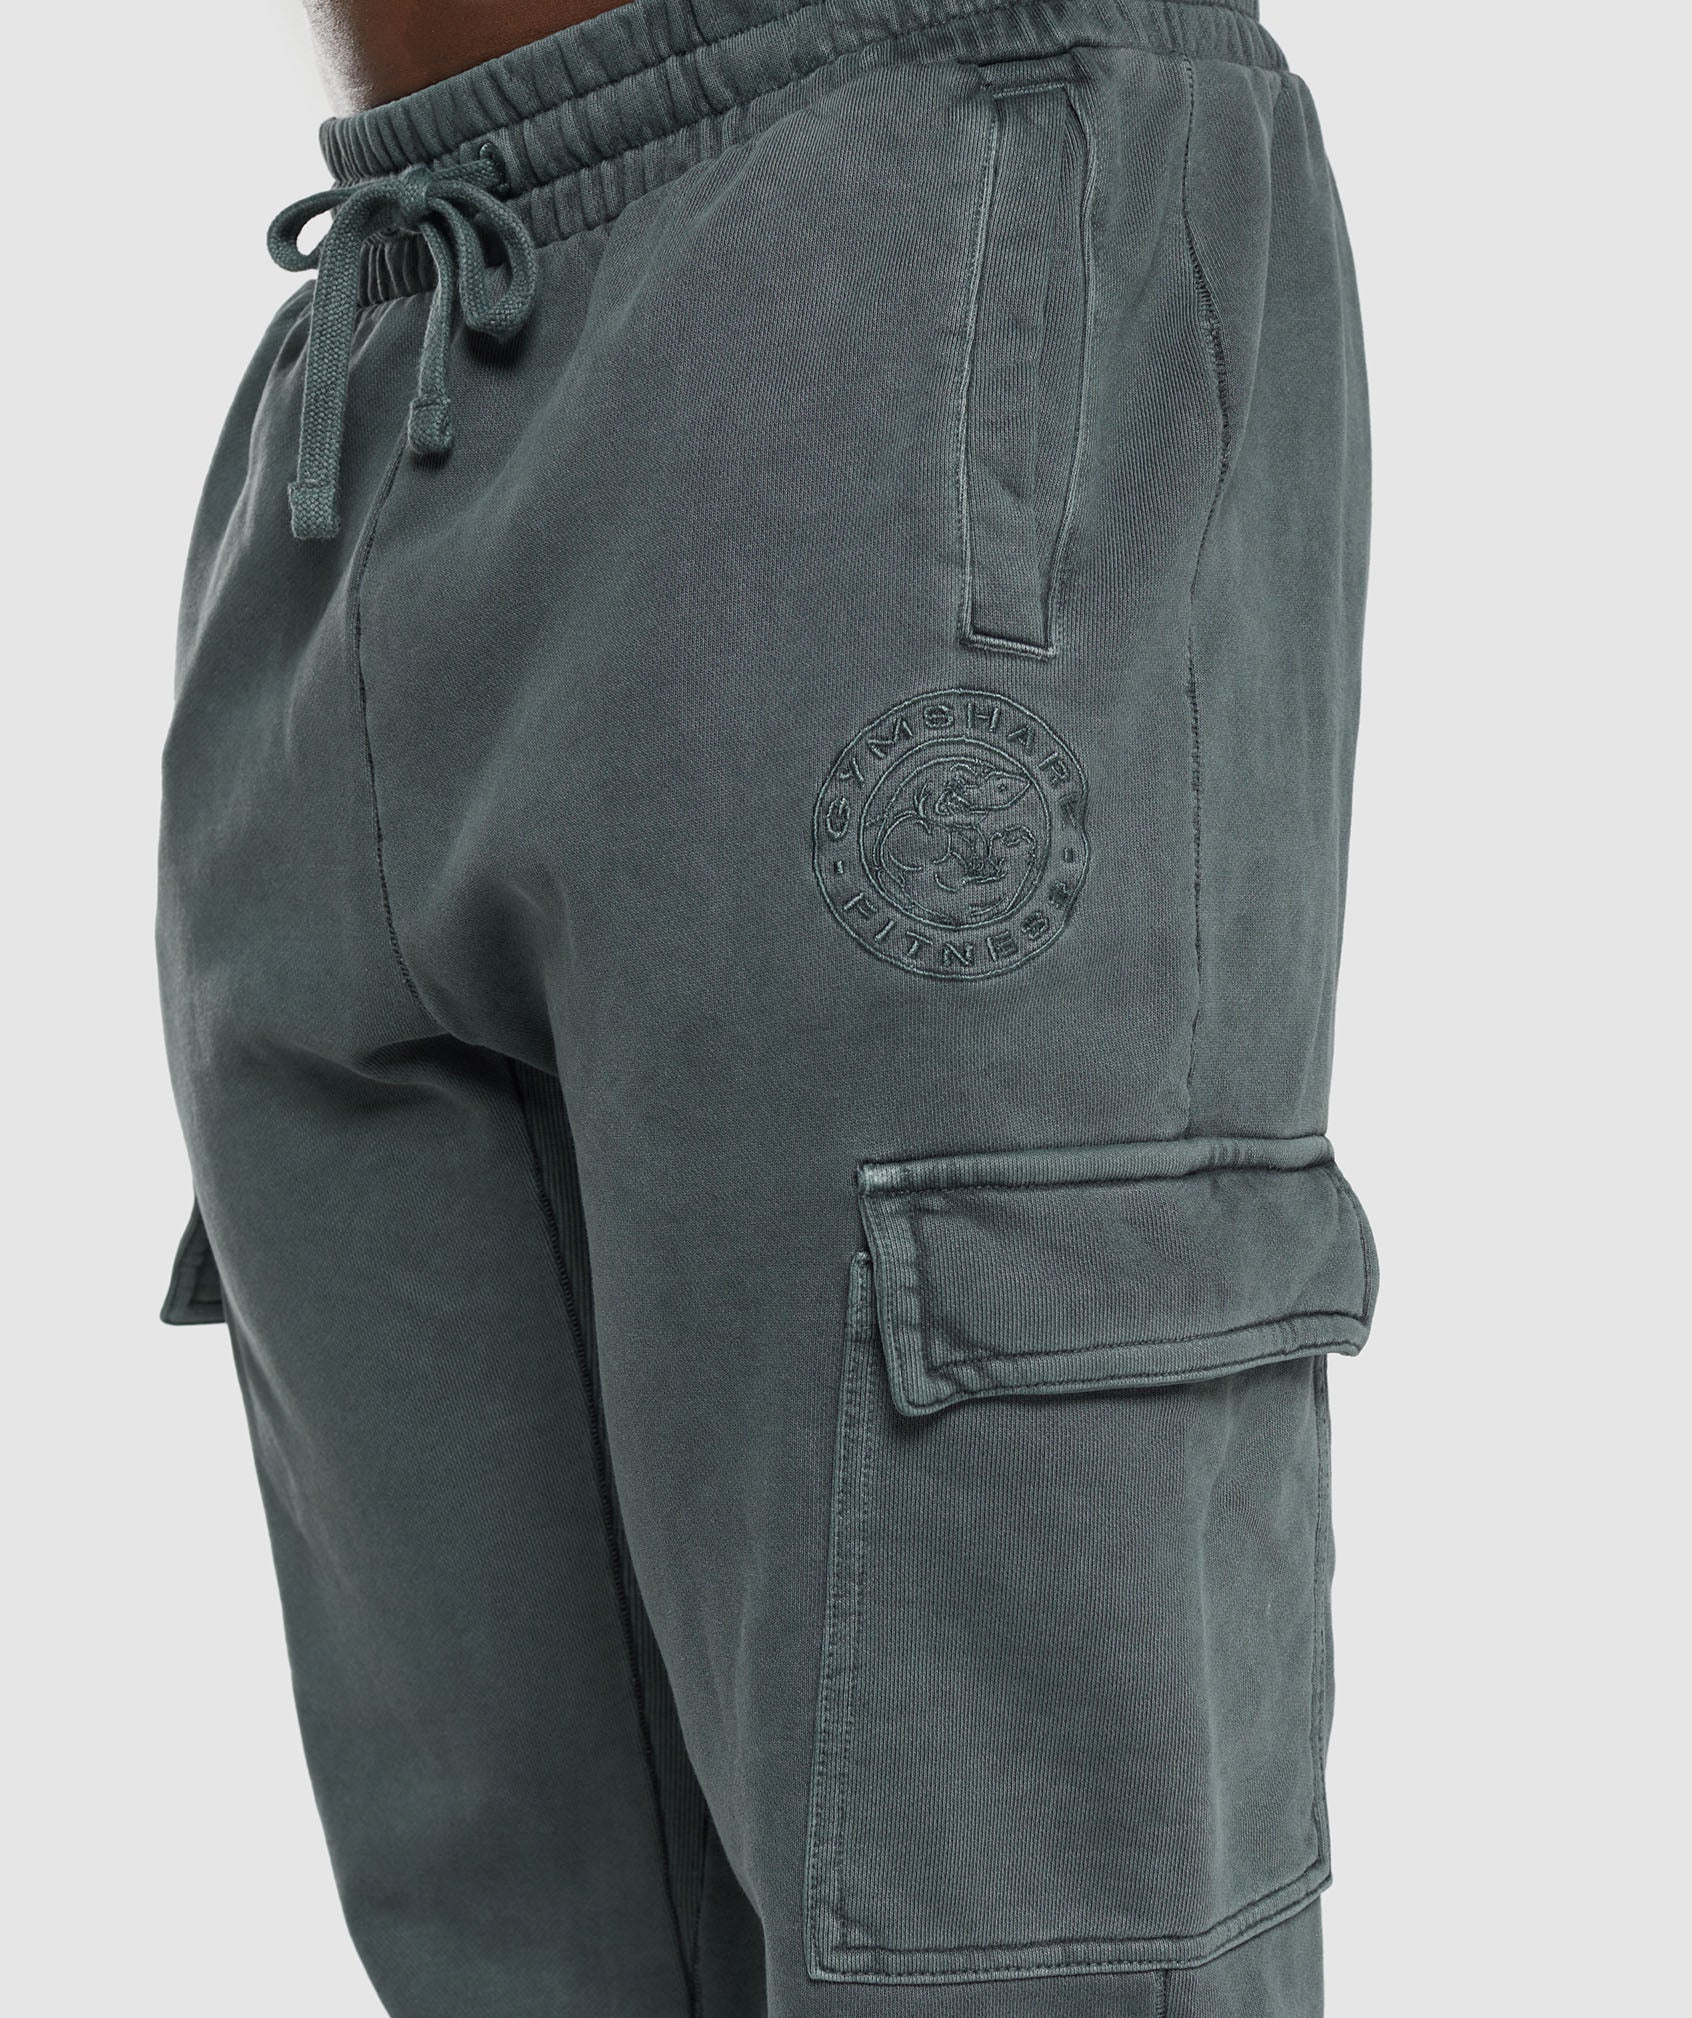 Premium Legacy Cargo Pants in Cargo Teal - view 5